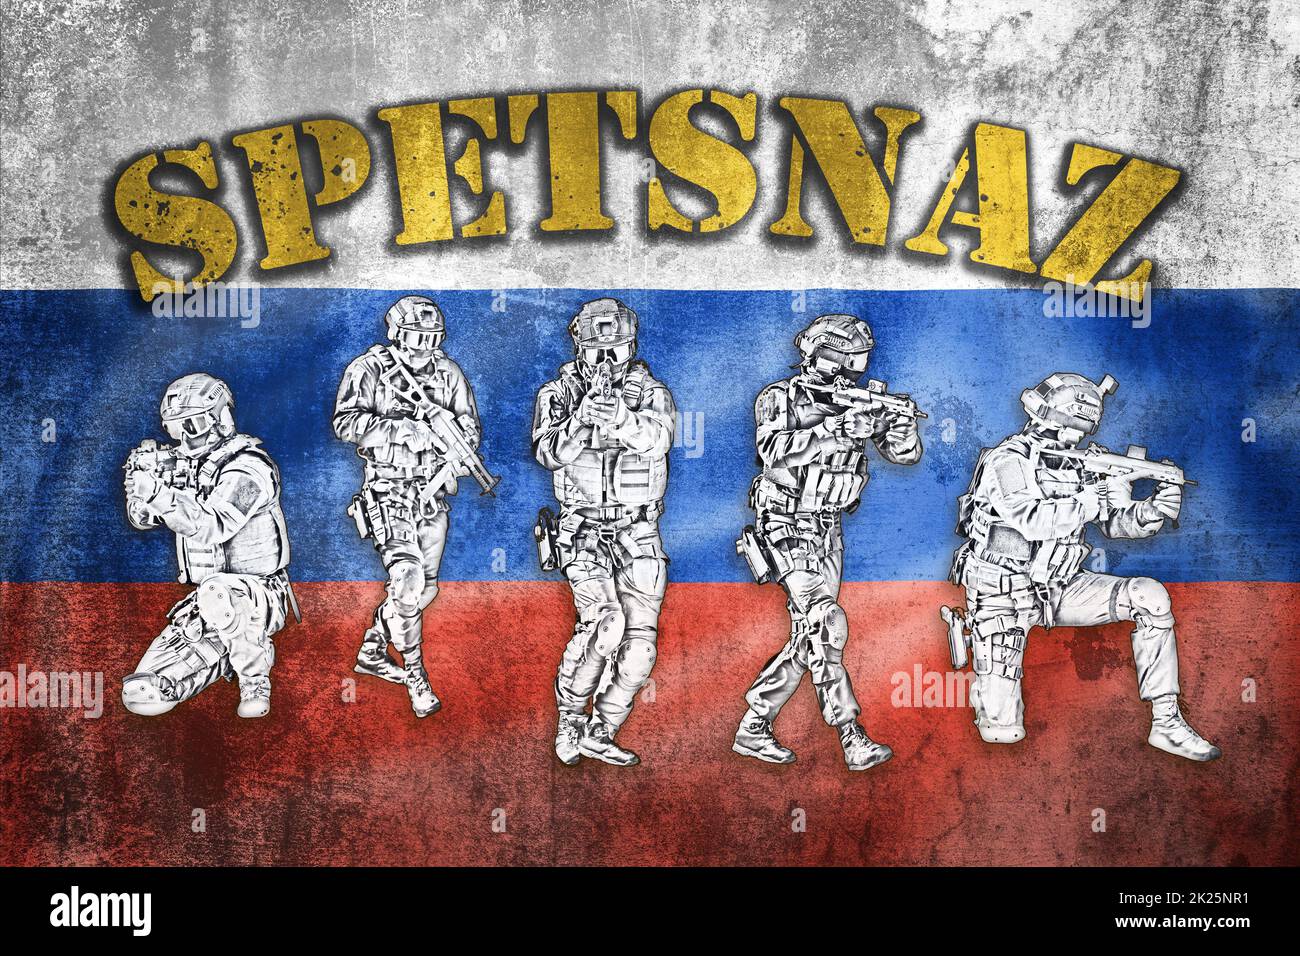 Special forces tactical team in action illustration with Spetsnaz label on grunge Russian Federation flag, unmarked and unrecognizable SWAT team Stock Photo